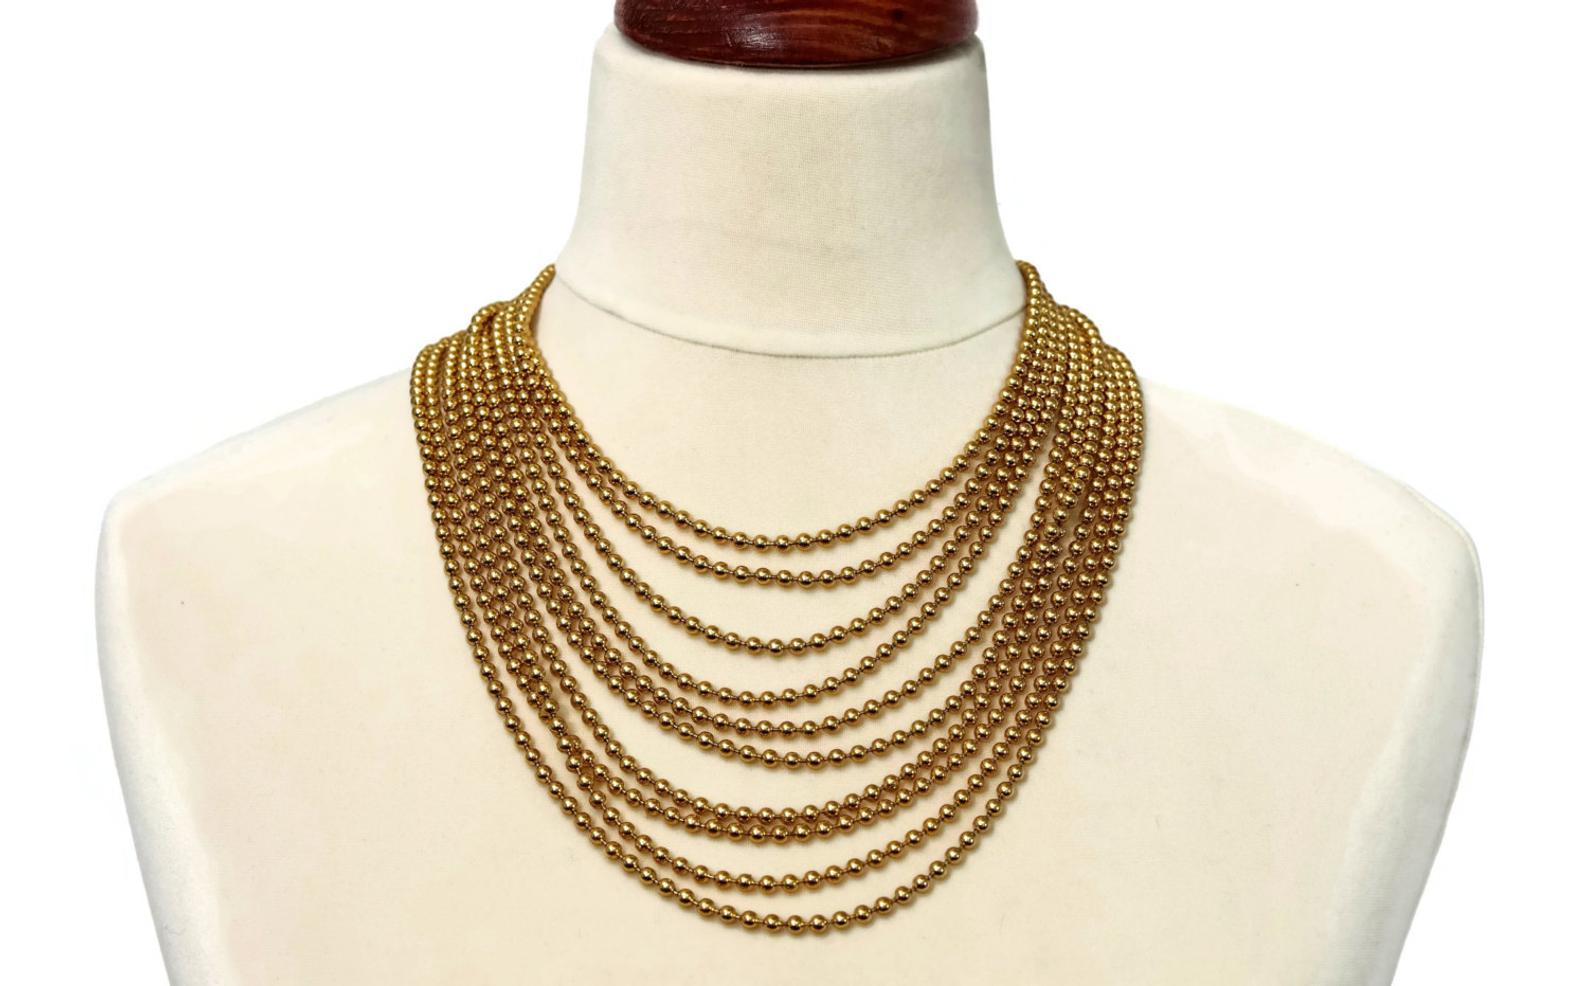 Vintage YVES SAINT LAURENT Multi Layer Chain Necklace

Measurement:
Wearable Length: 17 inches

Features:
- 100% Authentic YVES SAINT LAURENT.
- Massive necklace with 10 layers of Bead/ Ball Chain.
- YVES SAINT LAURENT signature twice on the bar